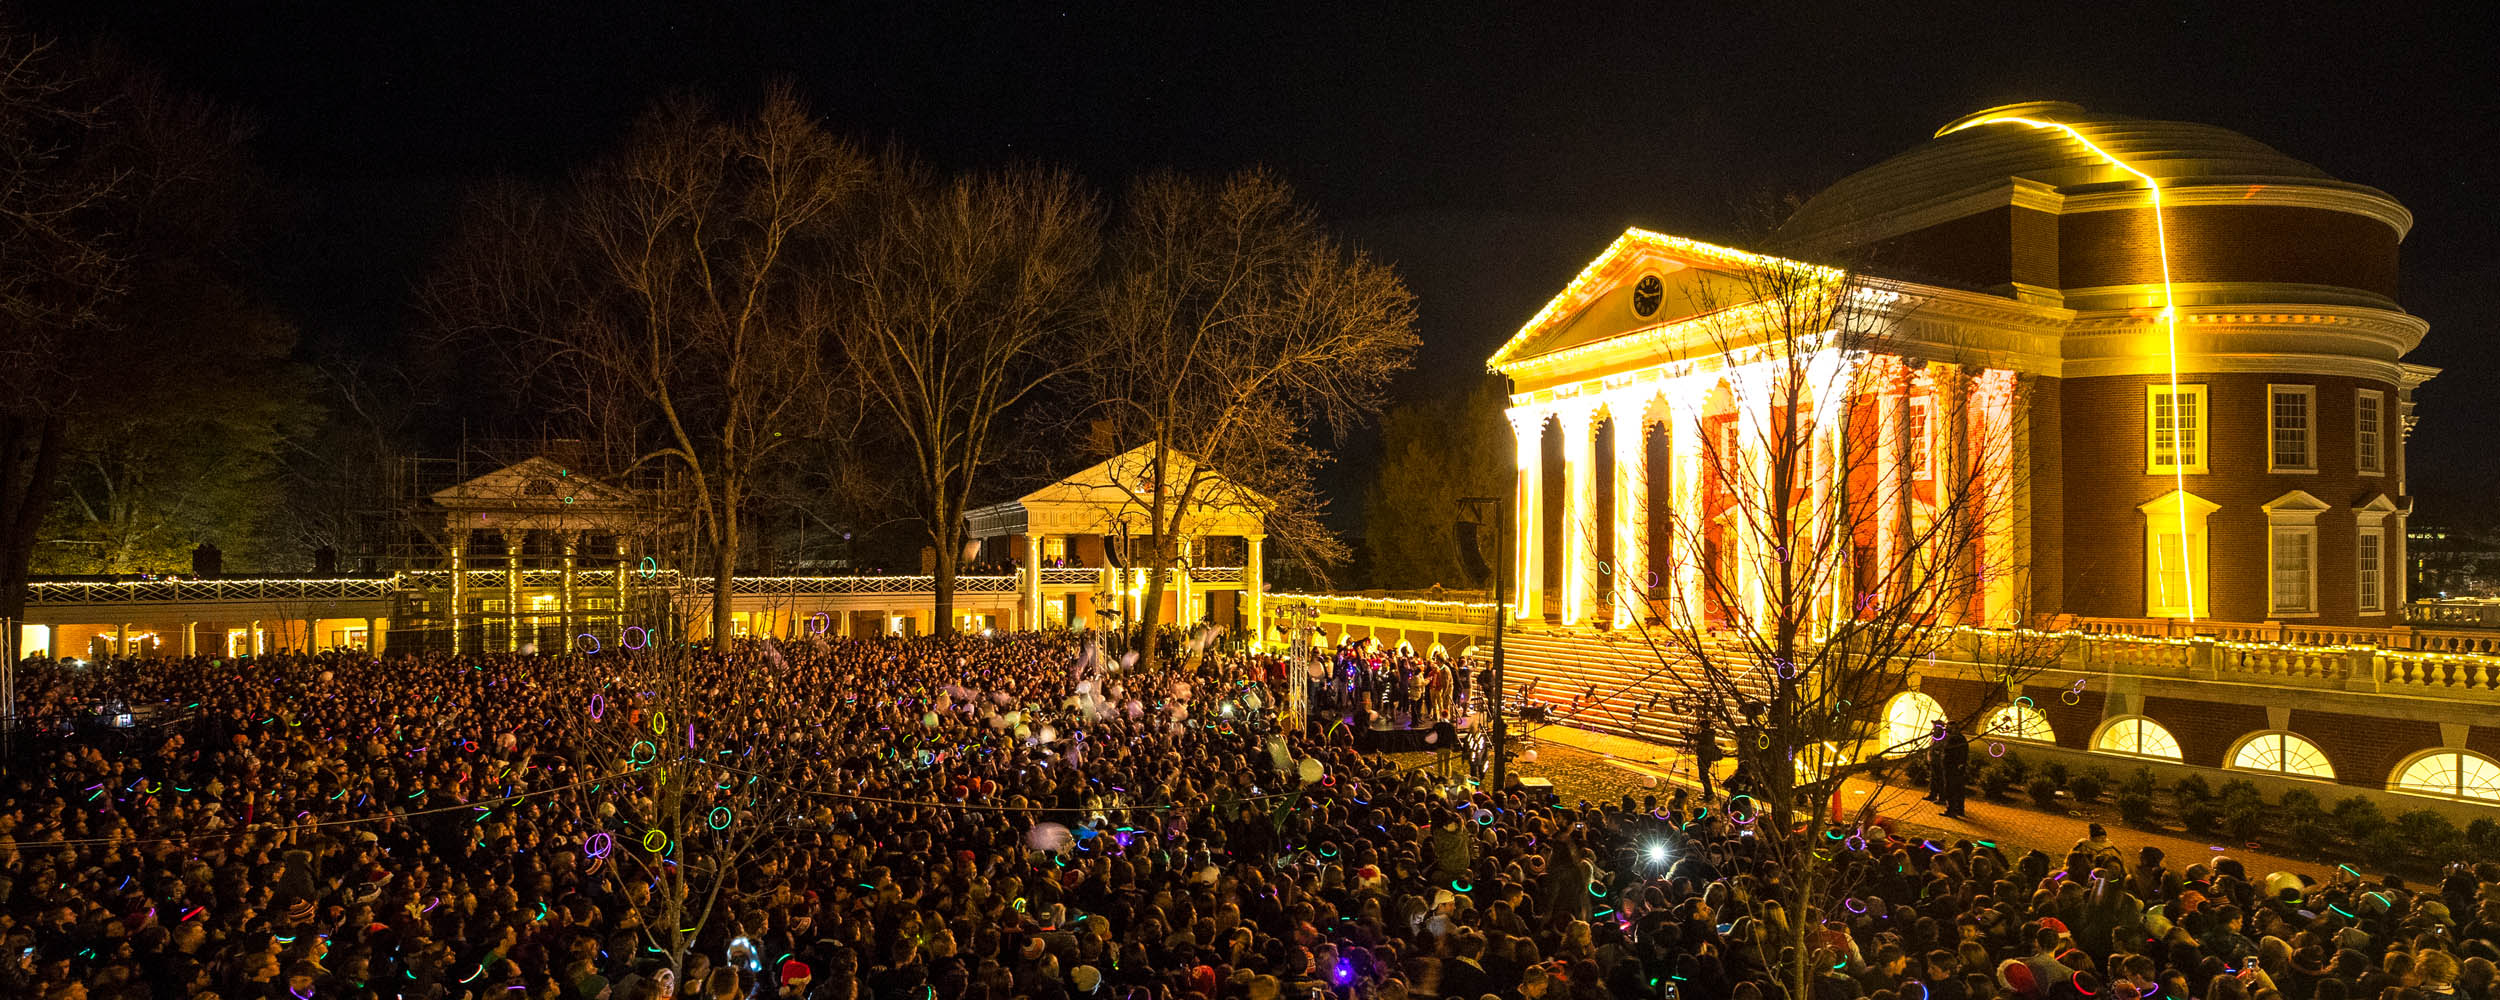 Lighting of the Lawn’ Tradition Draws Thousands to Grounds UVA Today